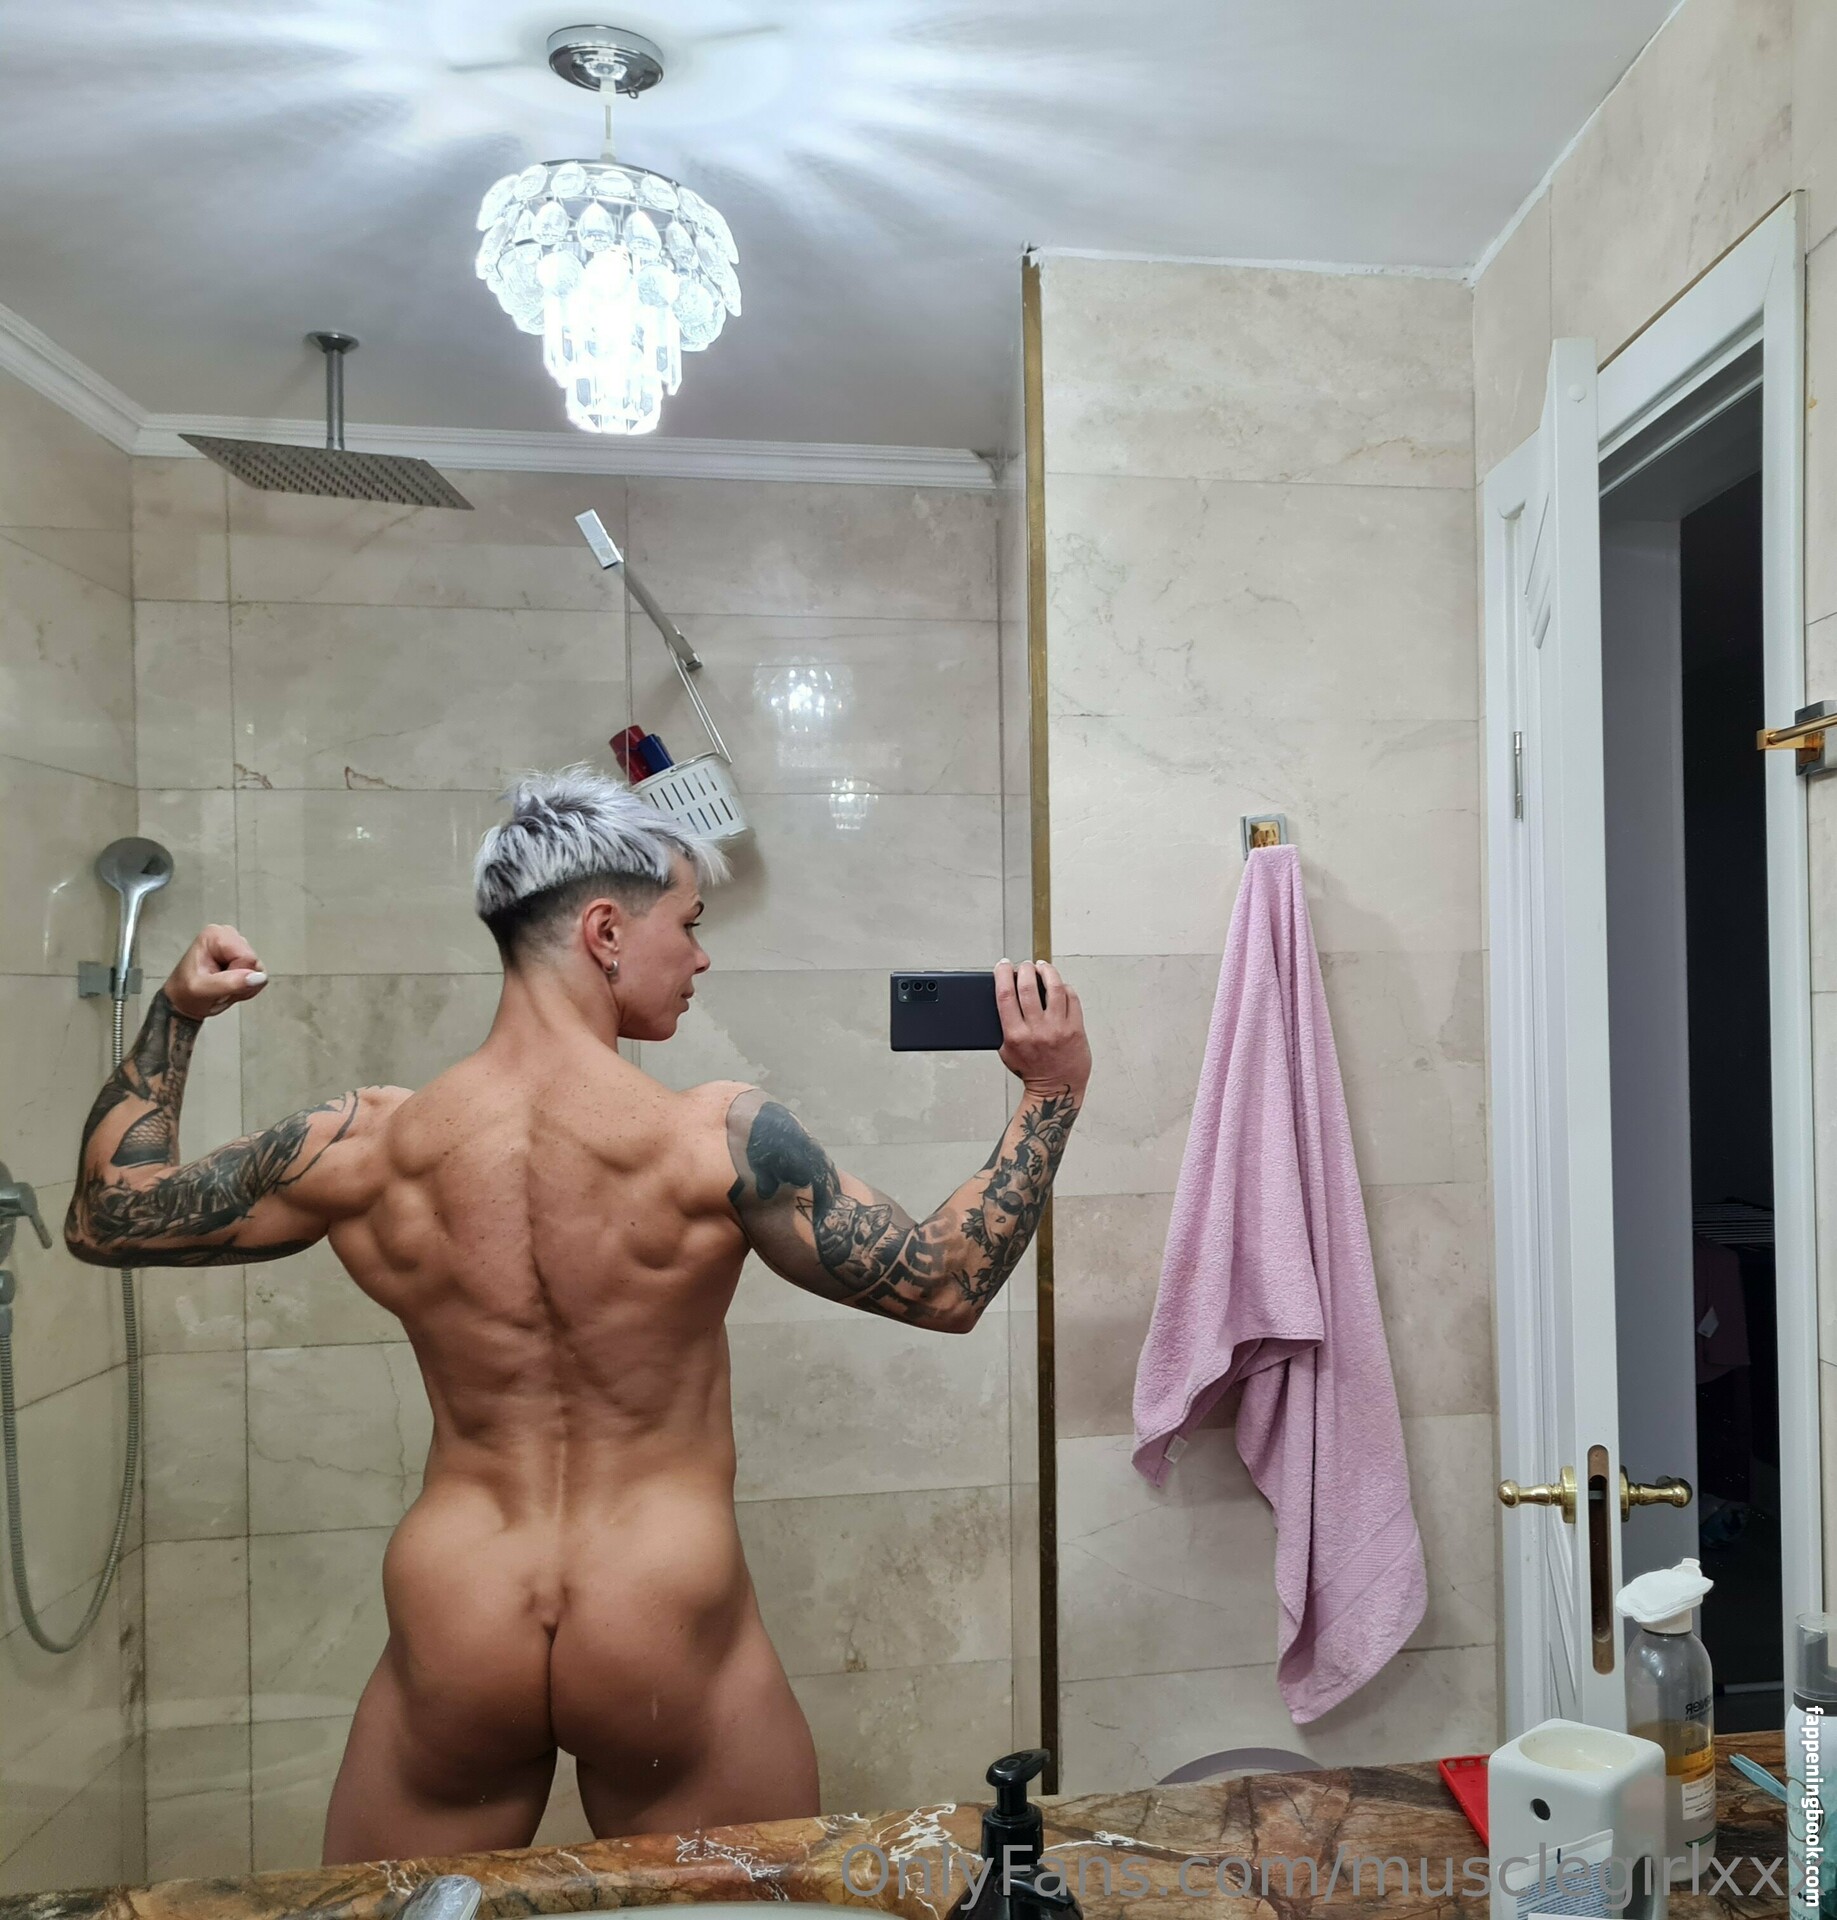 crazyxbody Nude OnlyFans Leaks